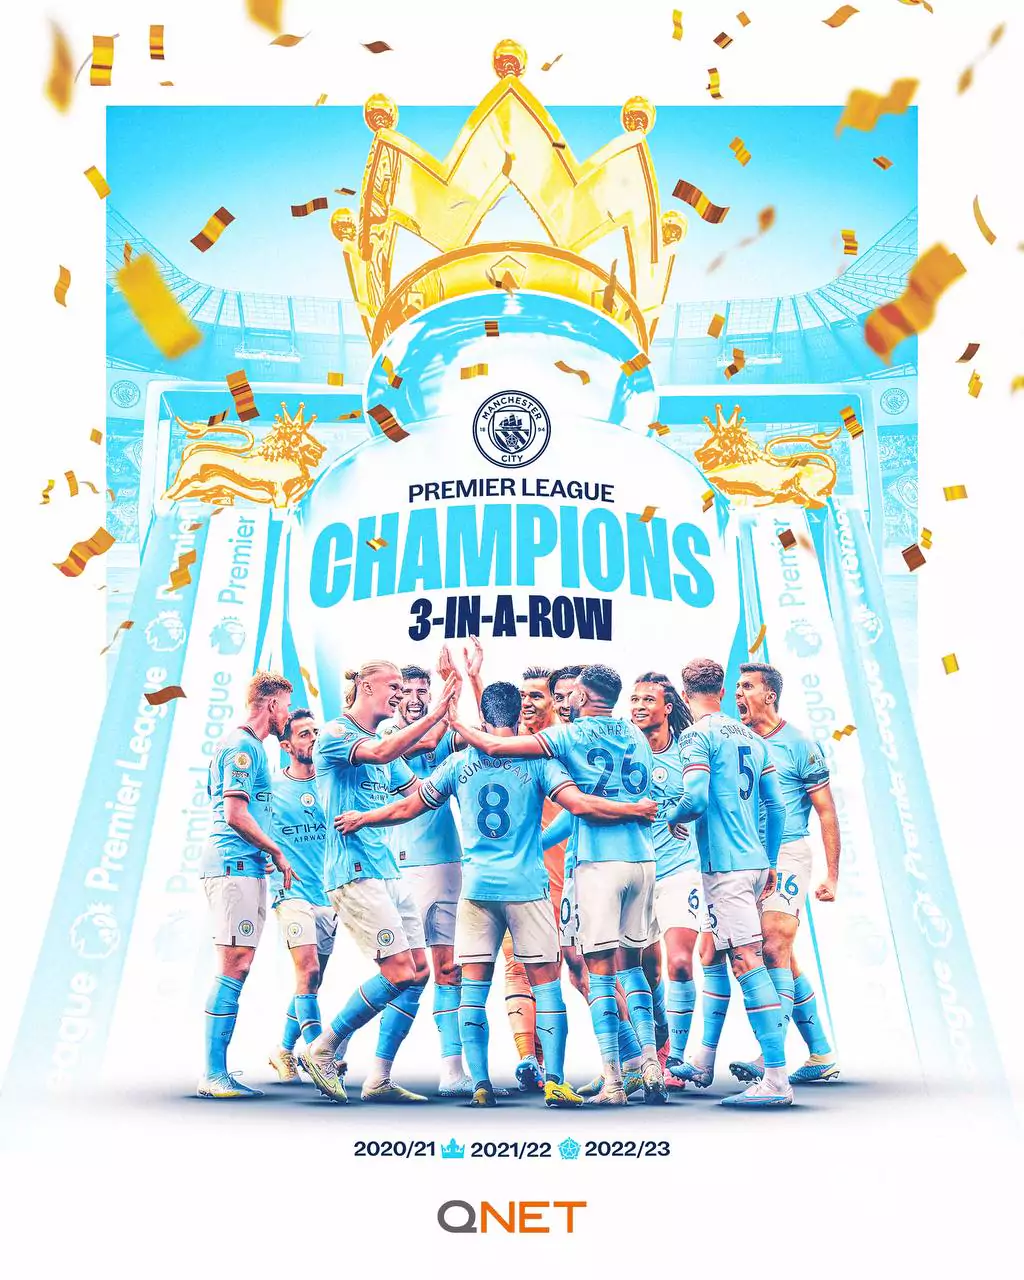 Manchester City are Premier League chamions. 3-in-a-row